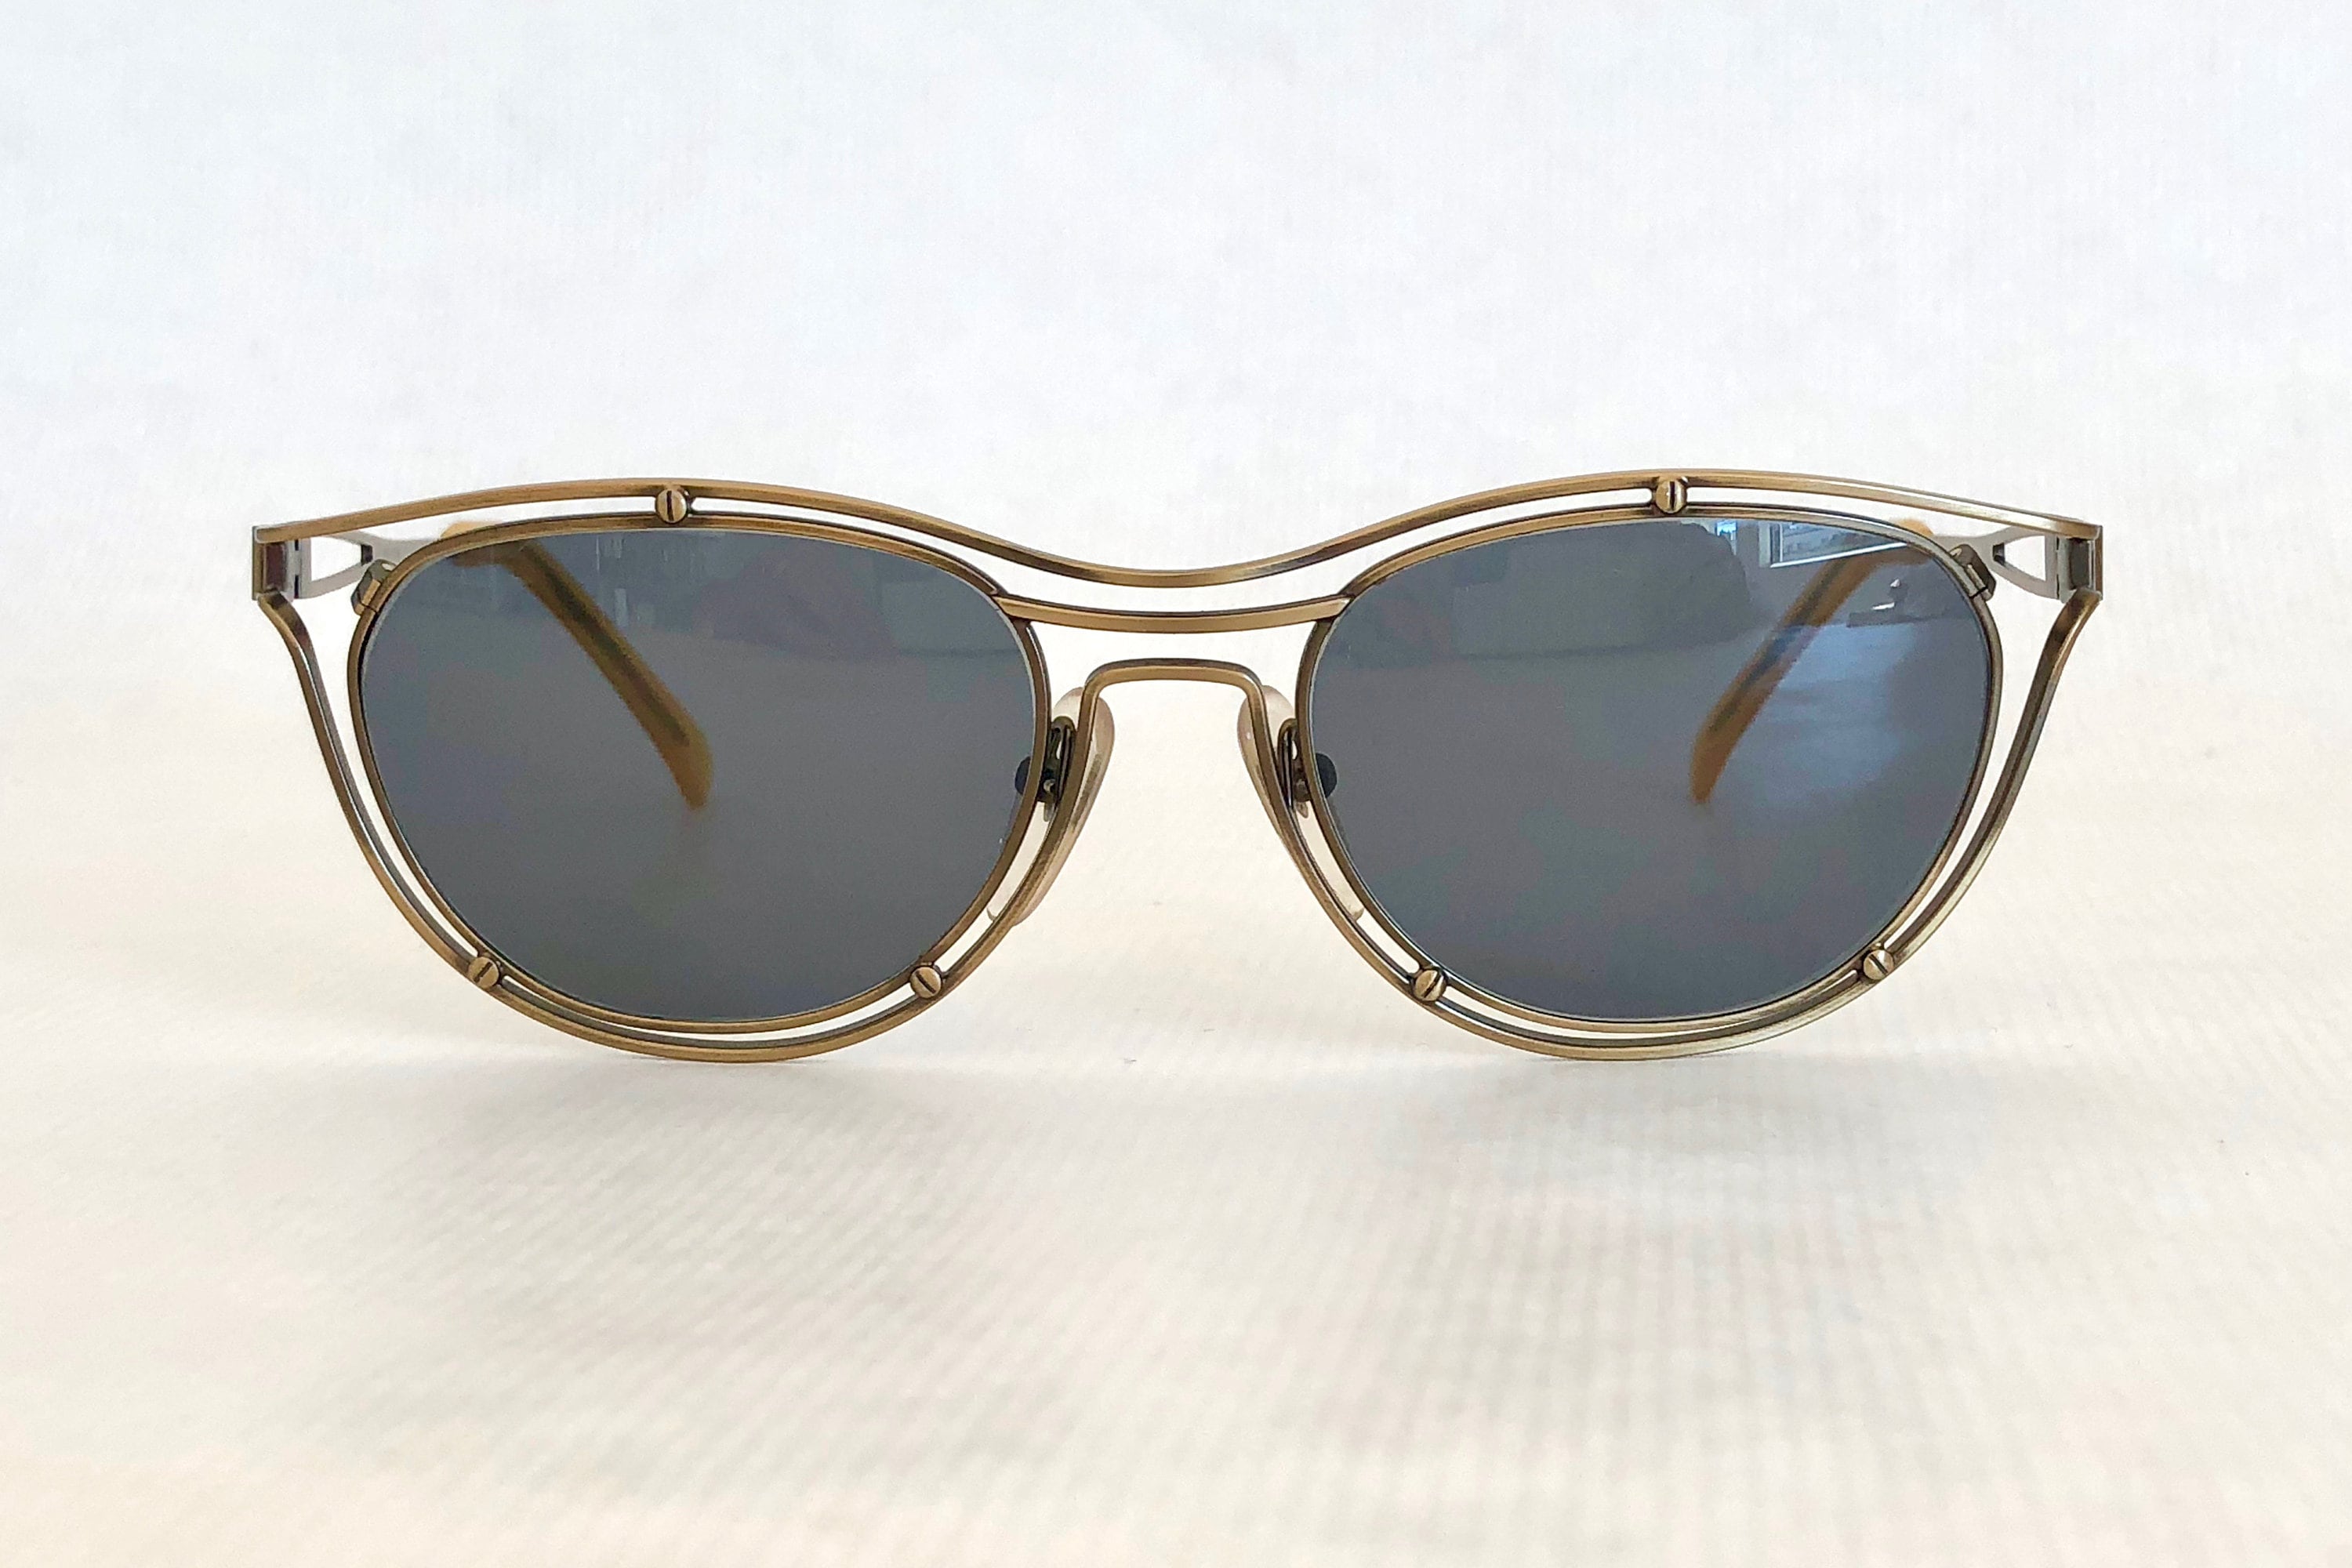 Jean Paul GAULTIER 56-2176 Vintage Sunglasses Made in Japan - New Old Stock